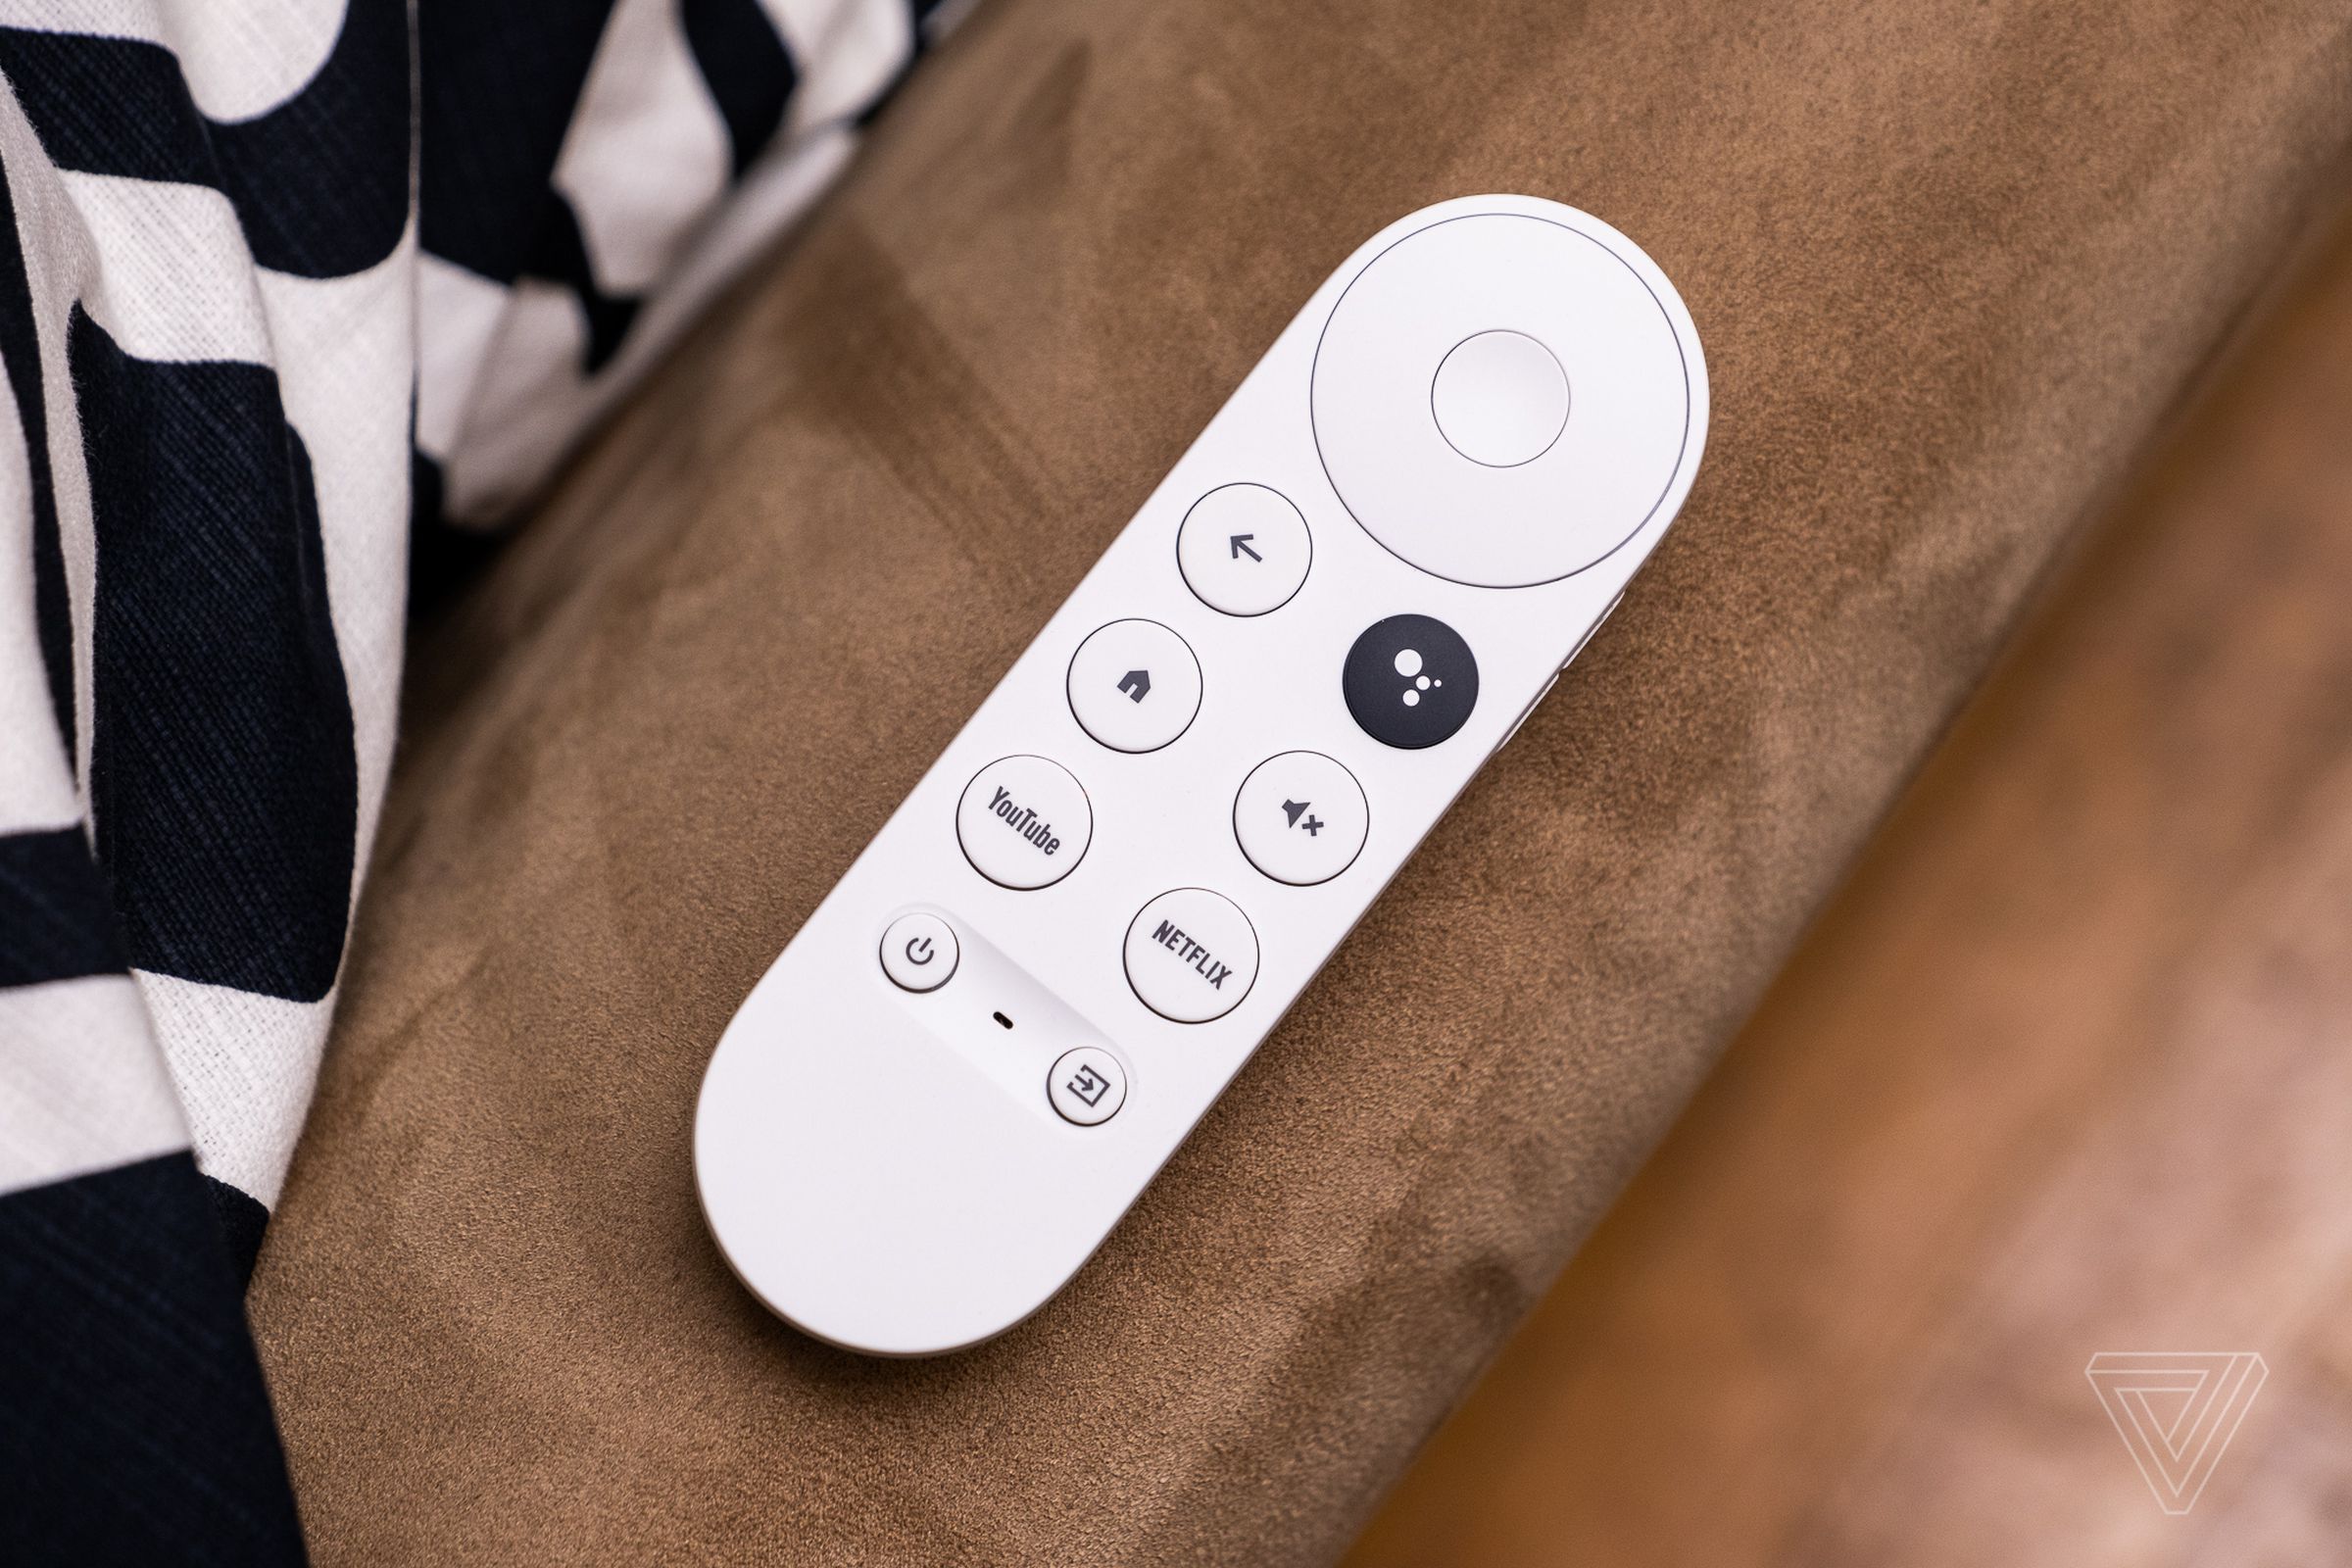 The Chromecast remote can control your TV over both IR and HDMI-CEC. 